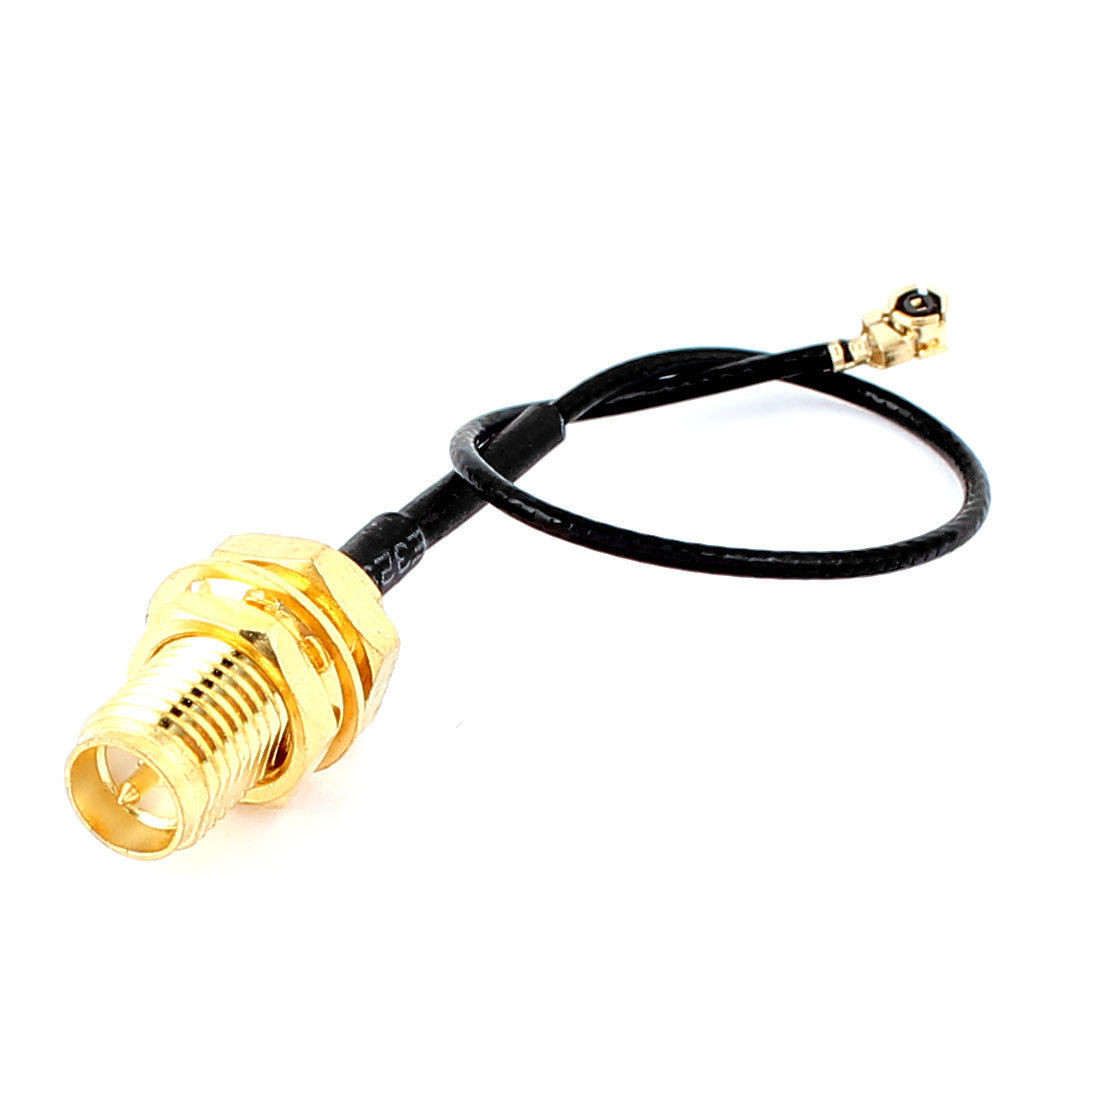 Best RF1.13 IPX to RP-SMA-K Antenna WiFi Pigtail Cable 13cm wholesale